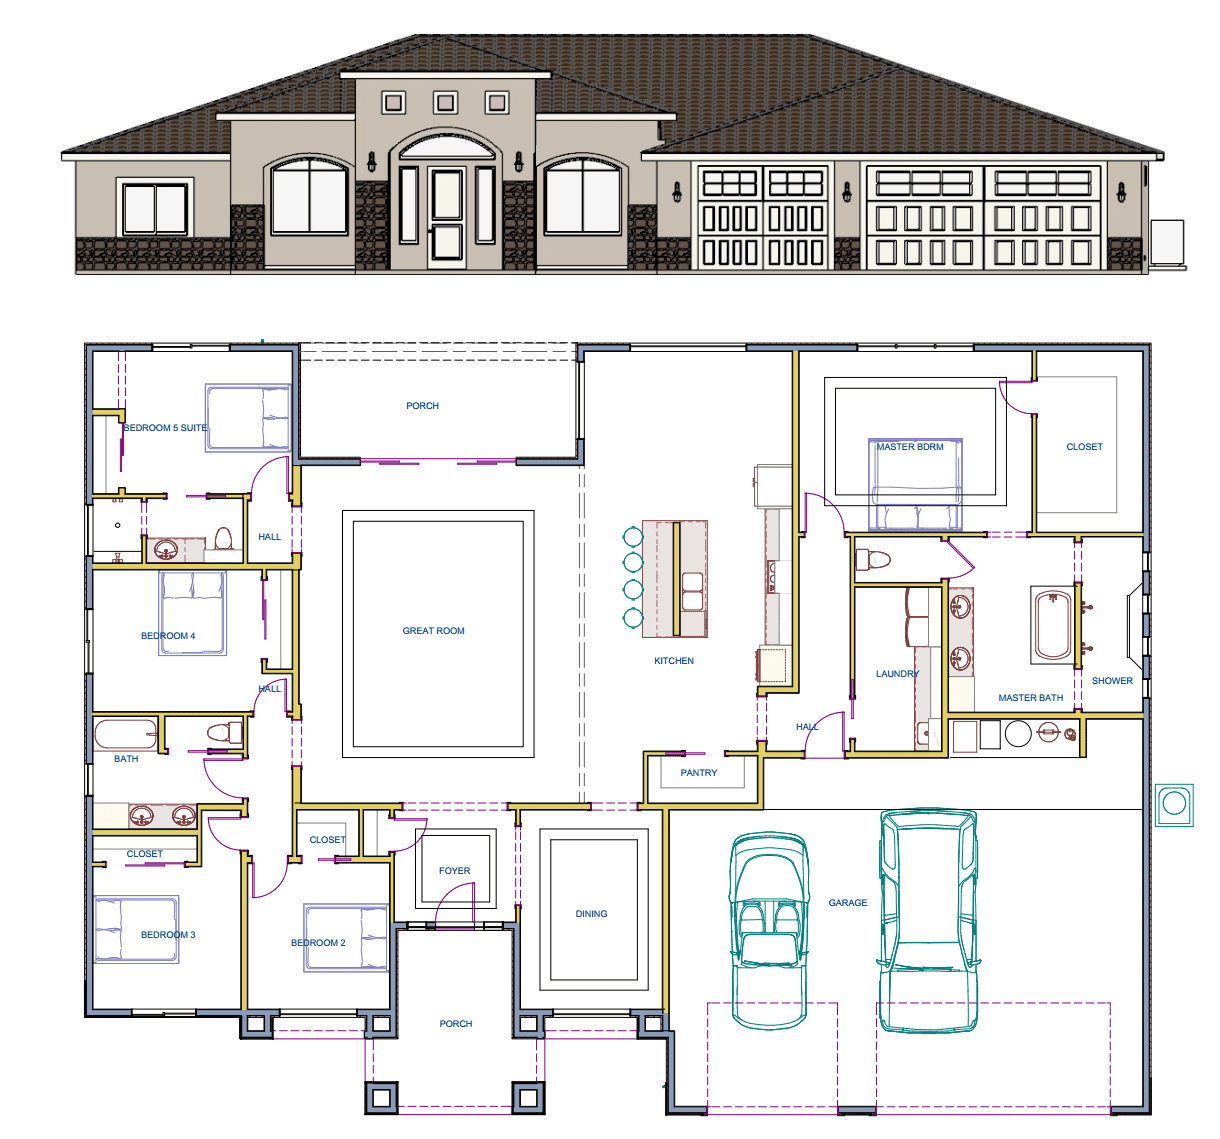 Spec Sheet of home during construction in Hereford Arizona